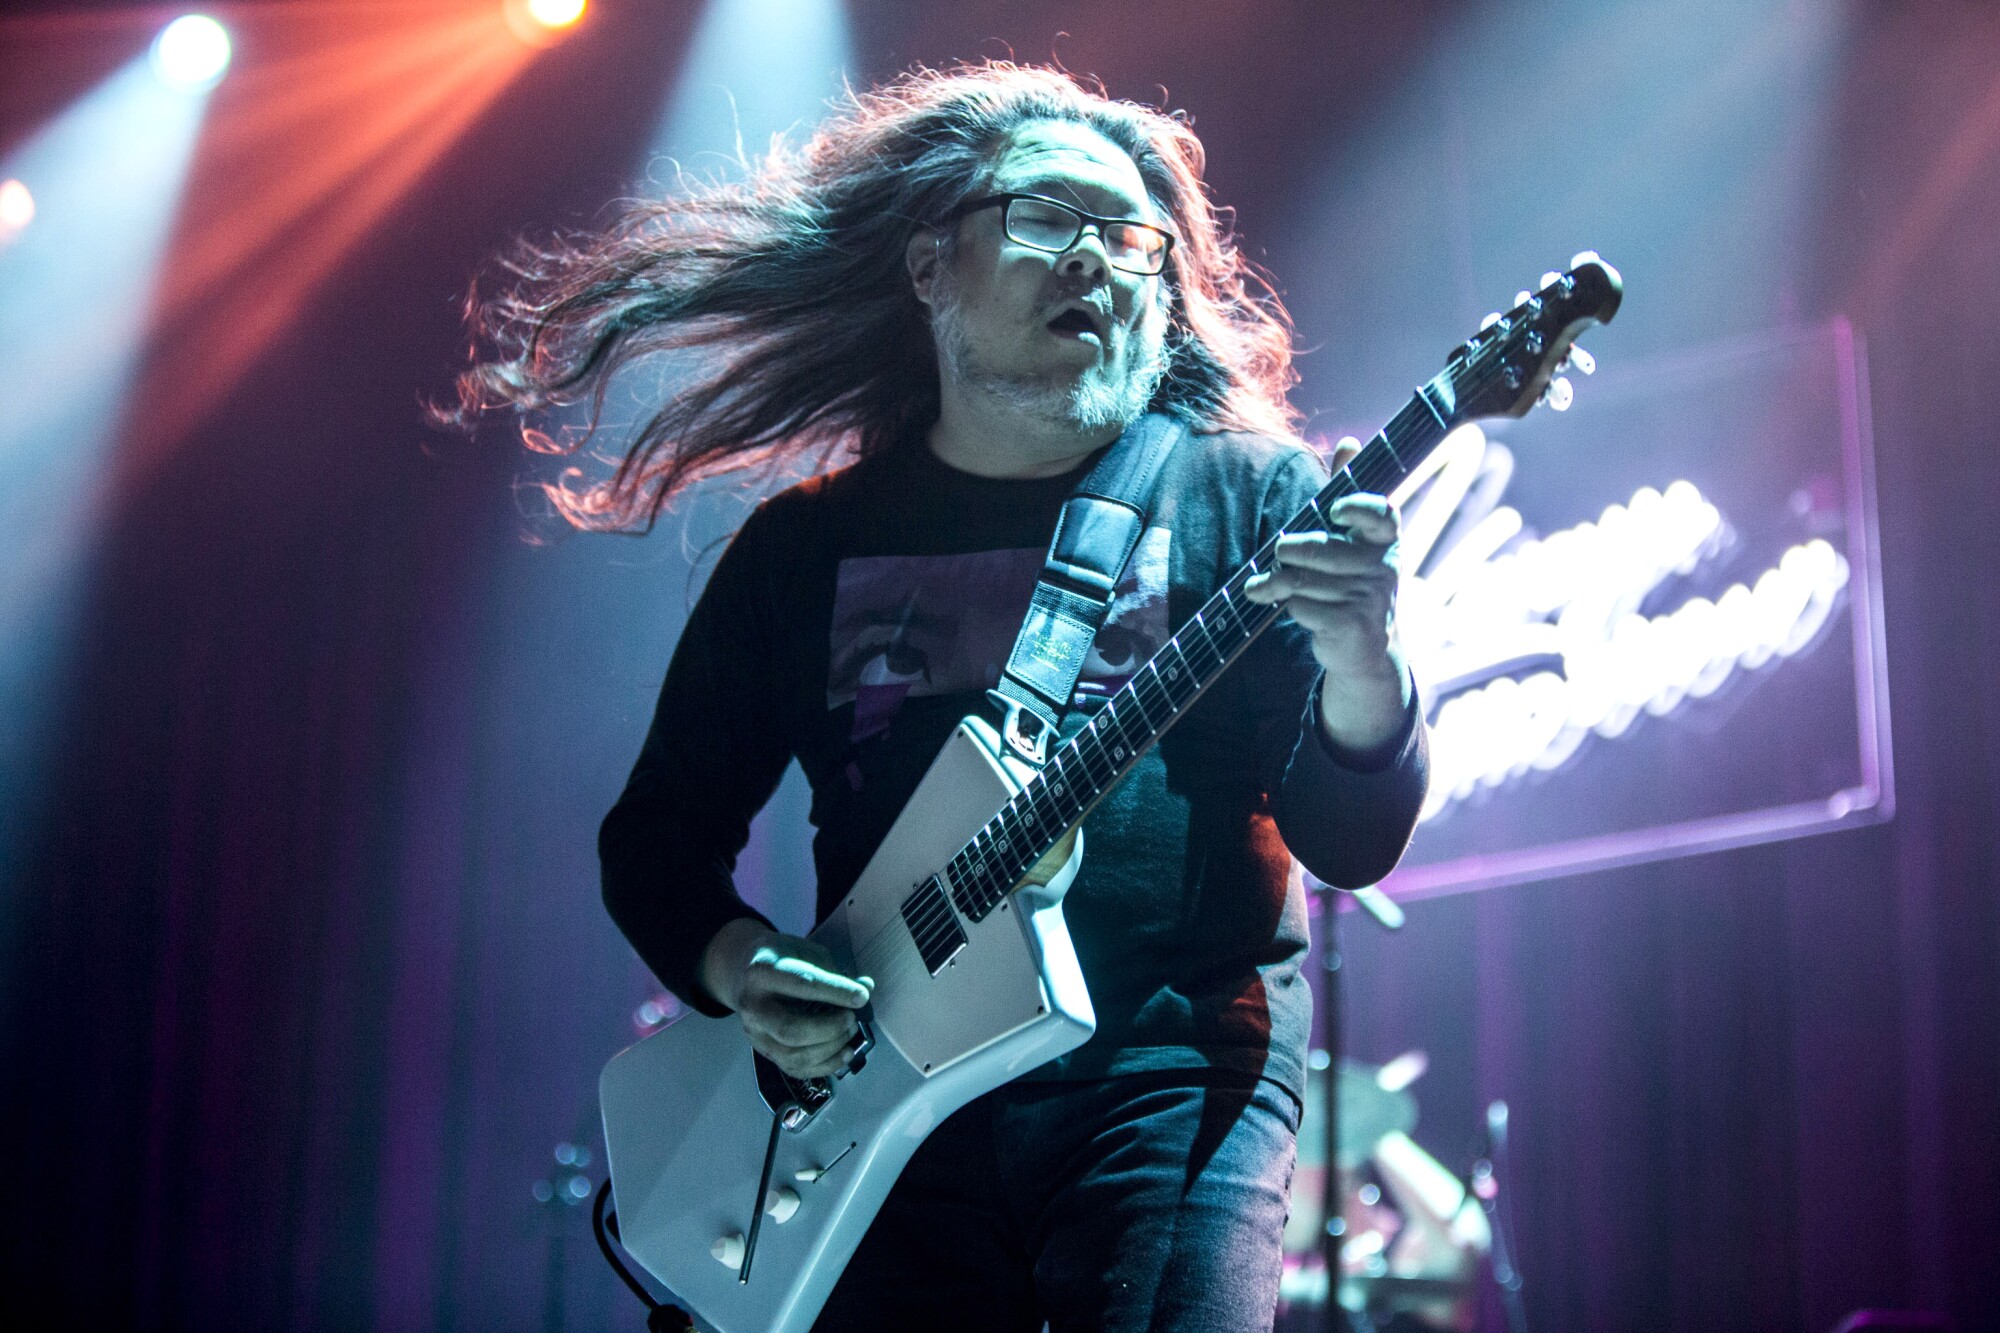 A man with long hair flying out behind him plays an electric guitar onstage.